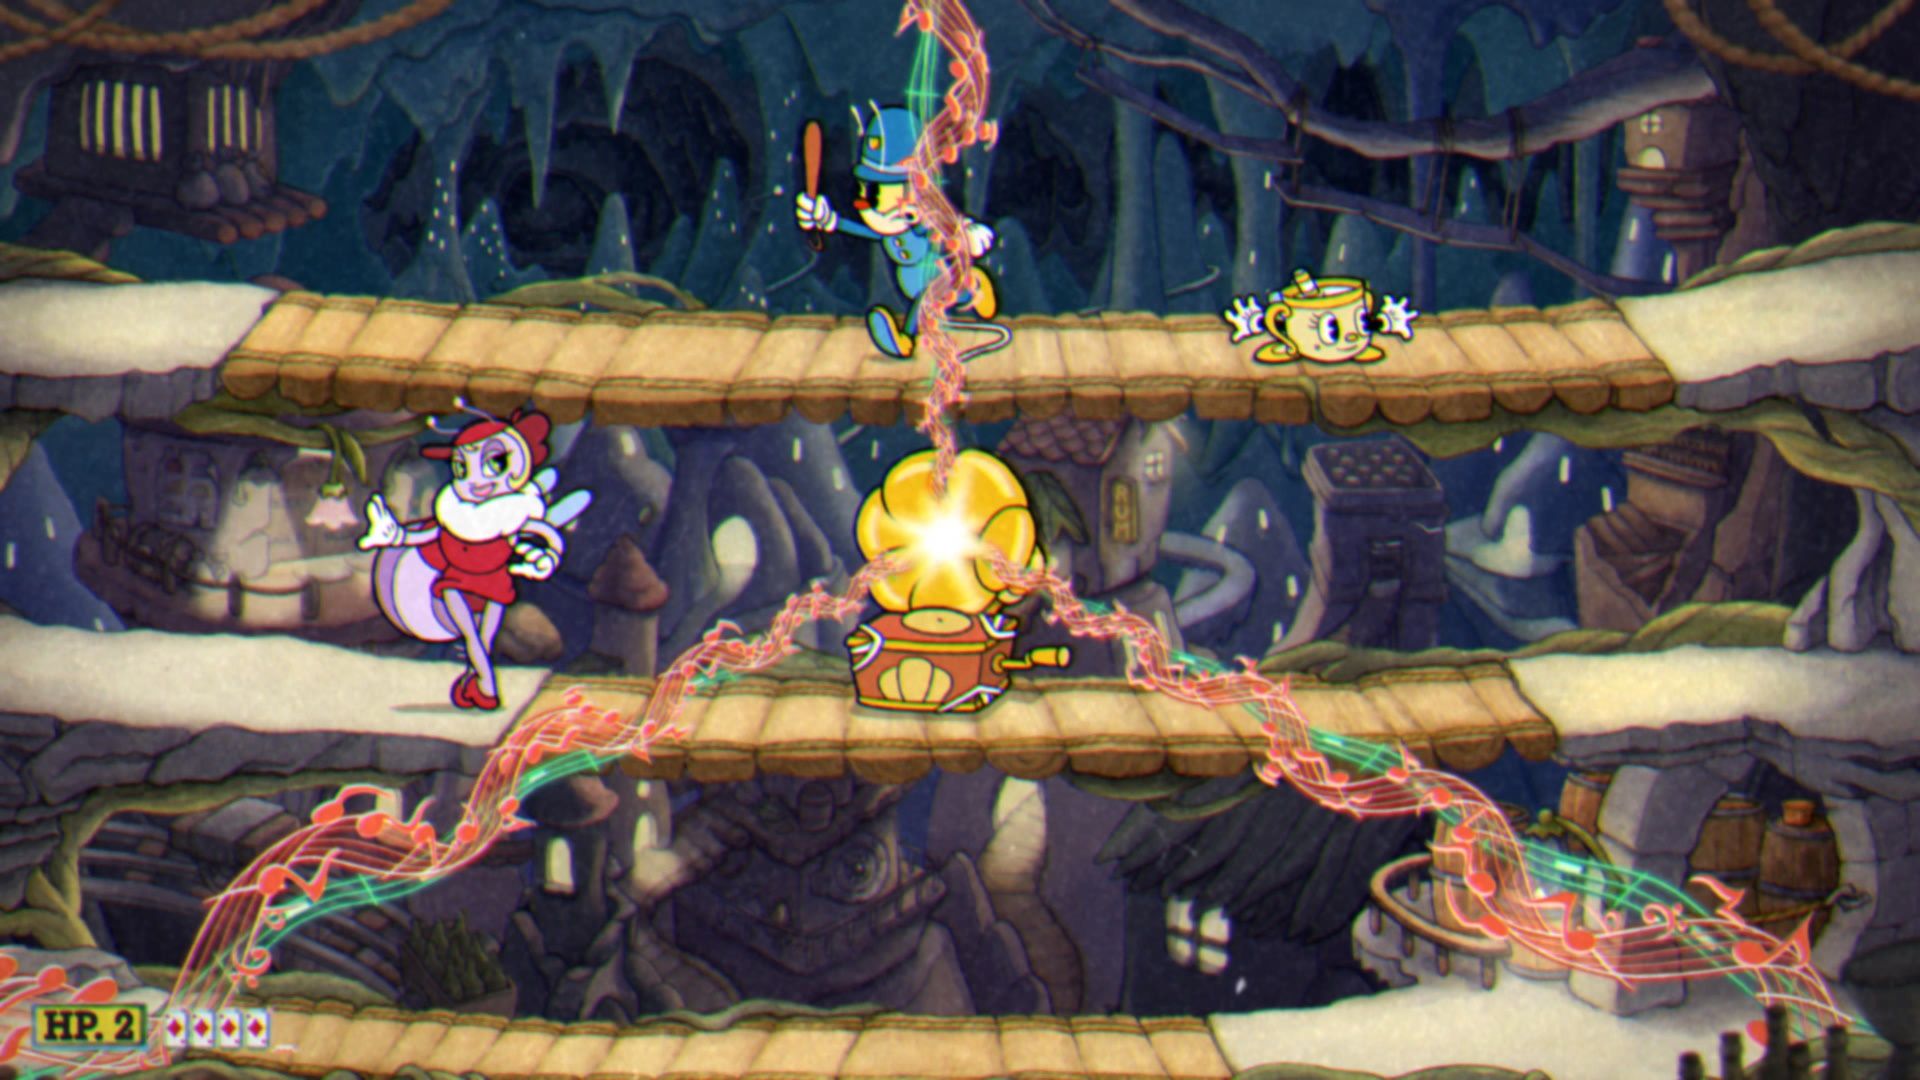 Cuphead The Delicious Course, The Moonshine Mob, Phase 2, Ms Chalice fighting the Lady Bug